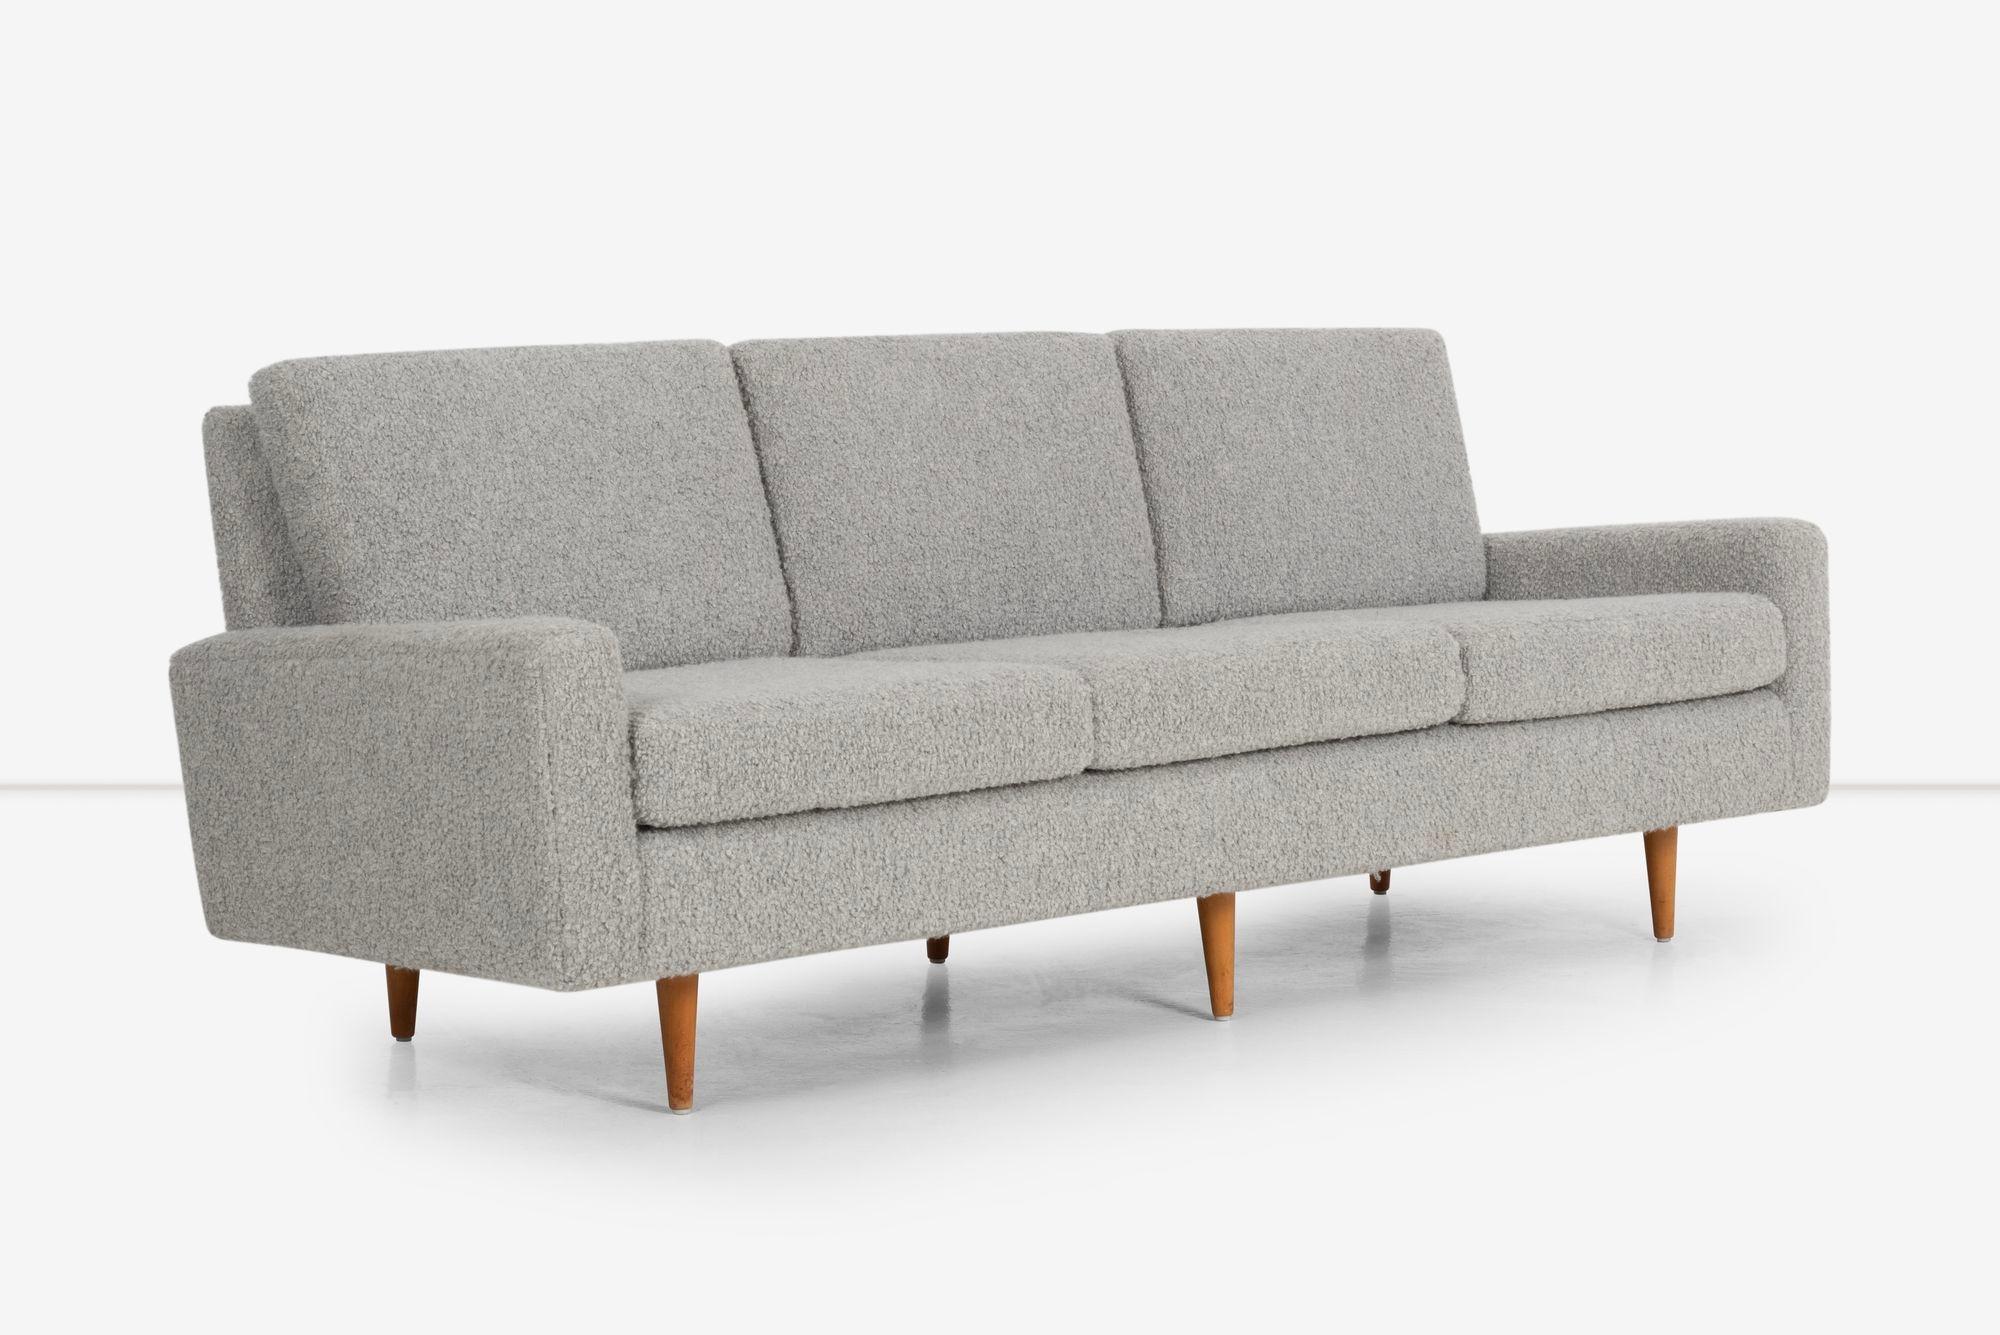 American Florence Knoll Three-Seat Sofa For Sale